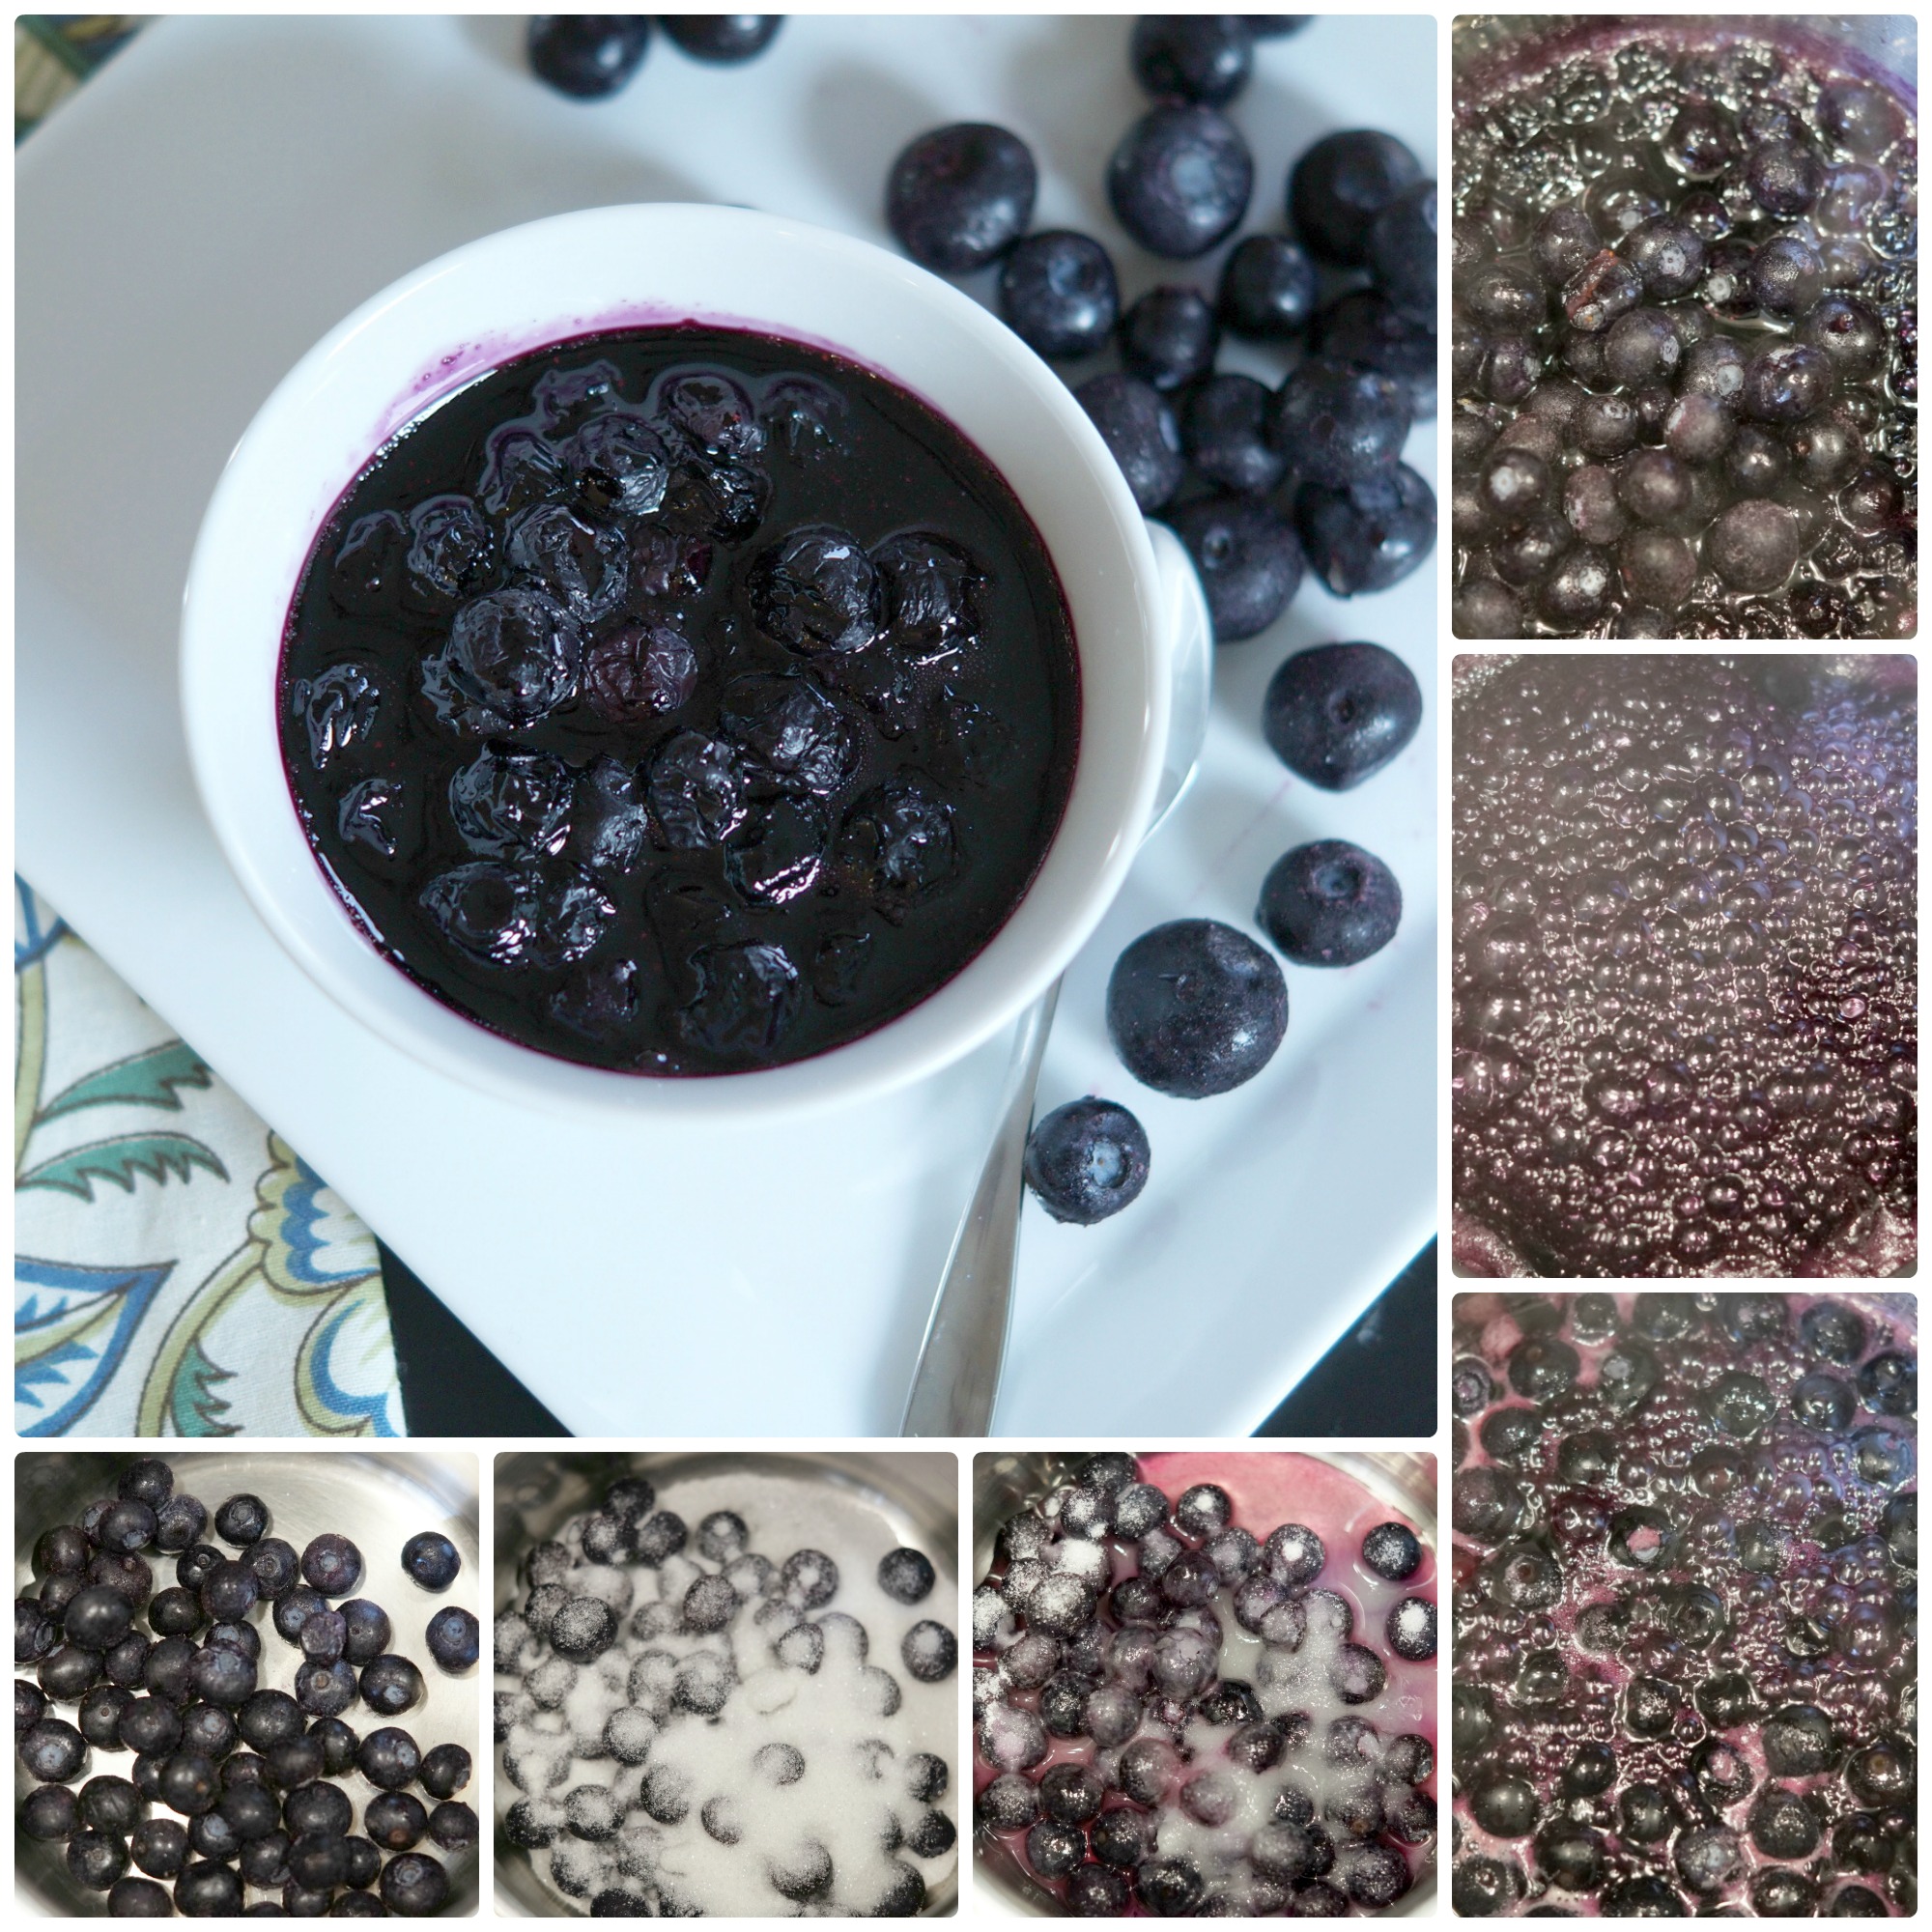 Simple and delicious blueberry compote is perfect for topping pancakes, waffles, and for stirring into yogurt and oatmeal. Check out the recipe today!